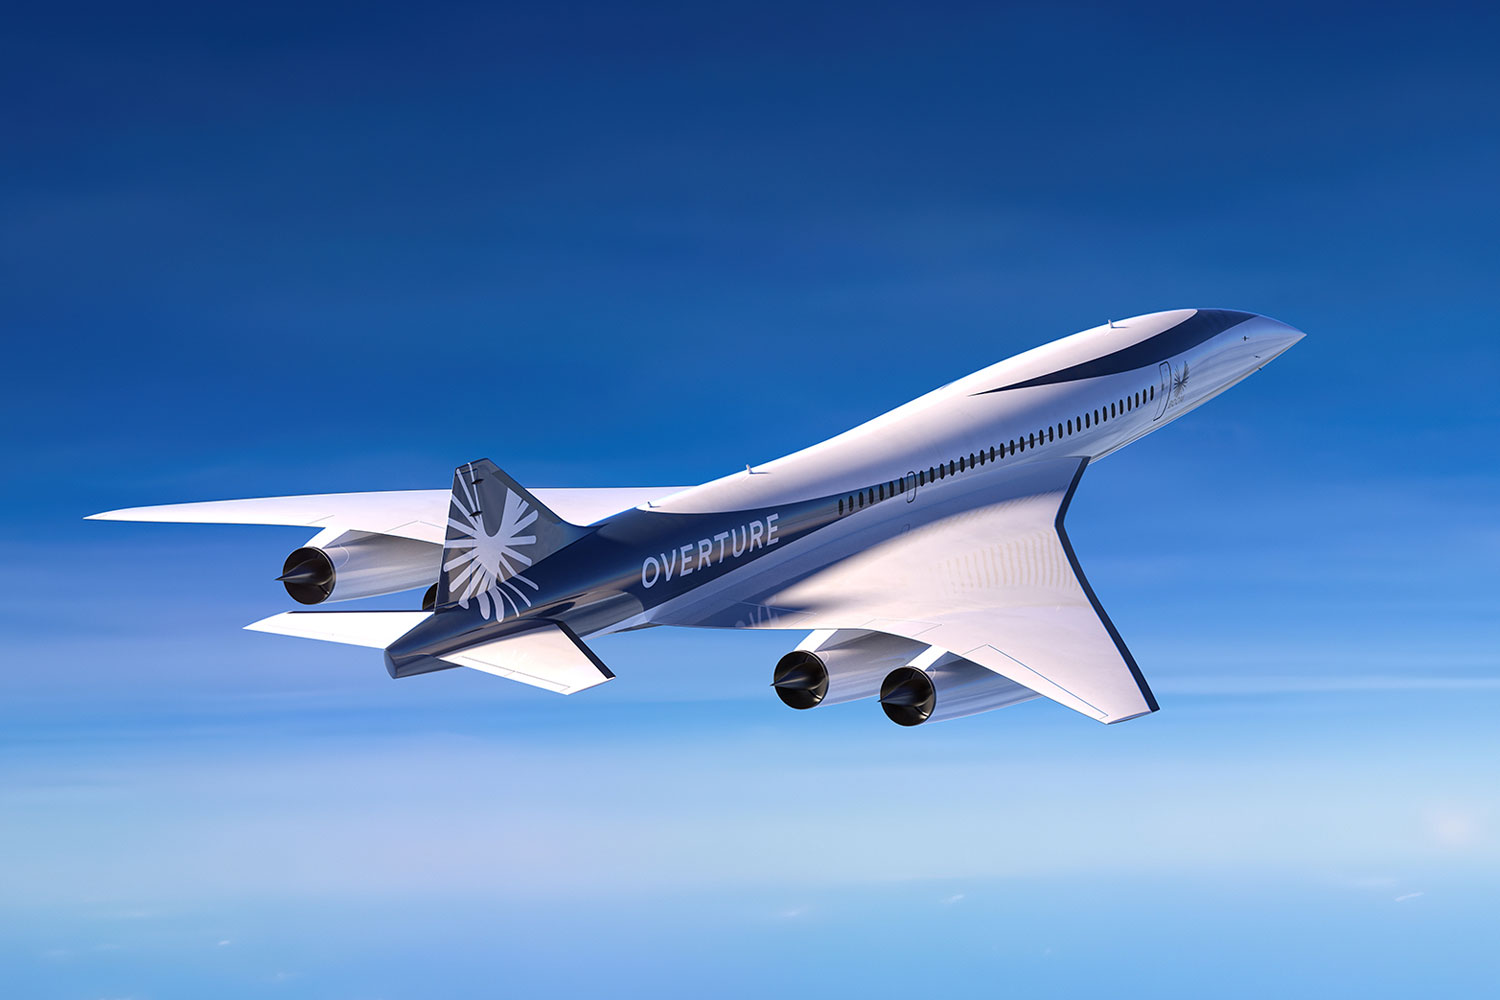 Boom unveils new suppliers for Overture supersonic airliner - AeroTime